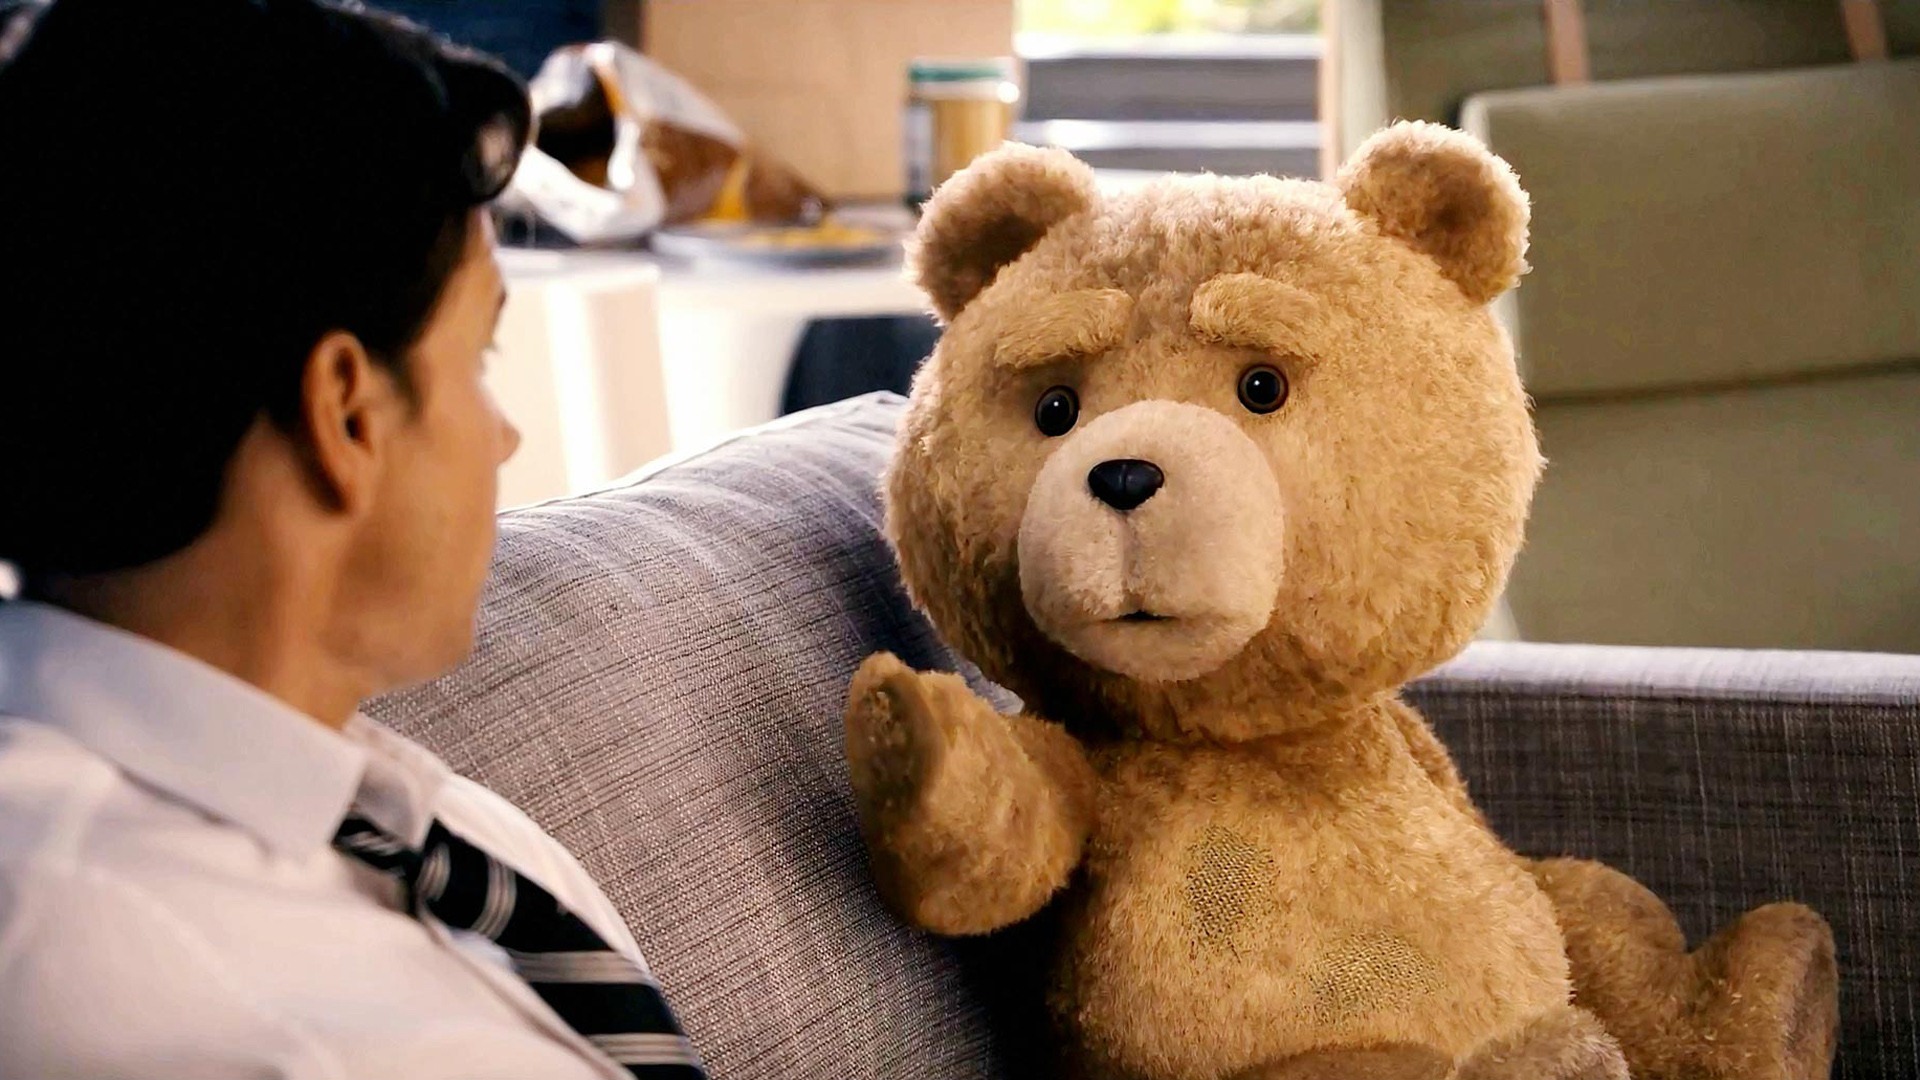 Ted 2012 HD movie wallpapers #8 - 1920x1080